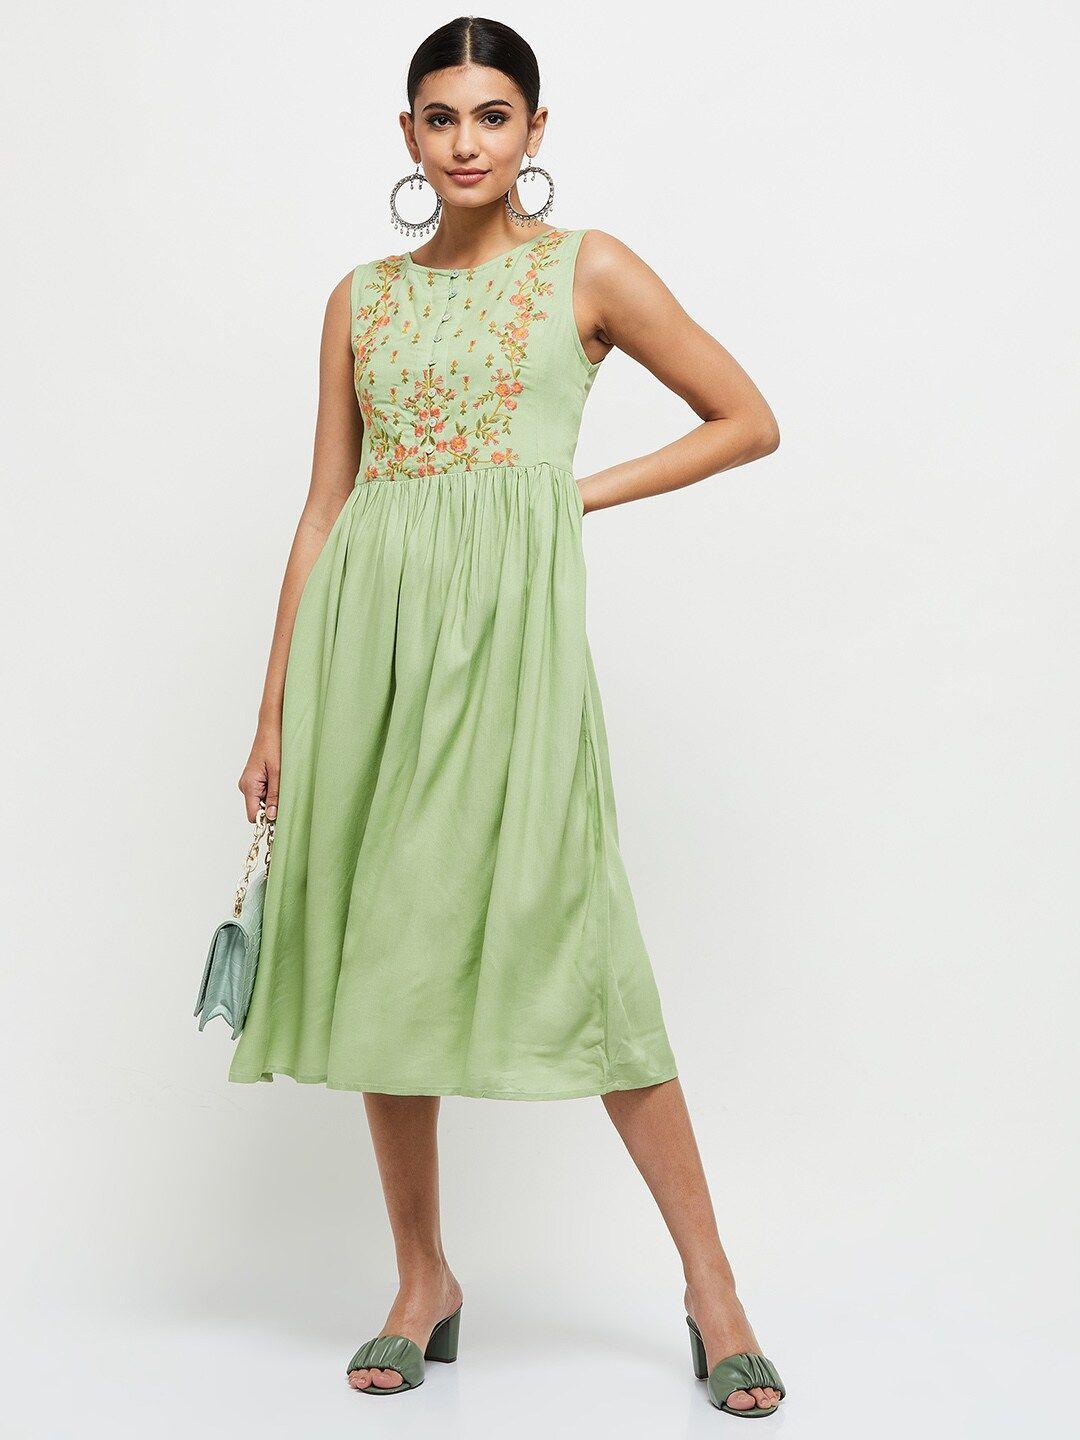 max-women-green-floral-embroidered-midi-dress